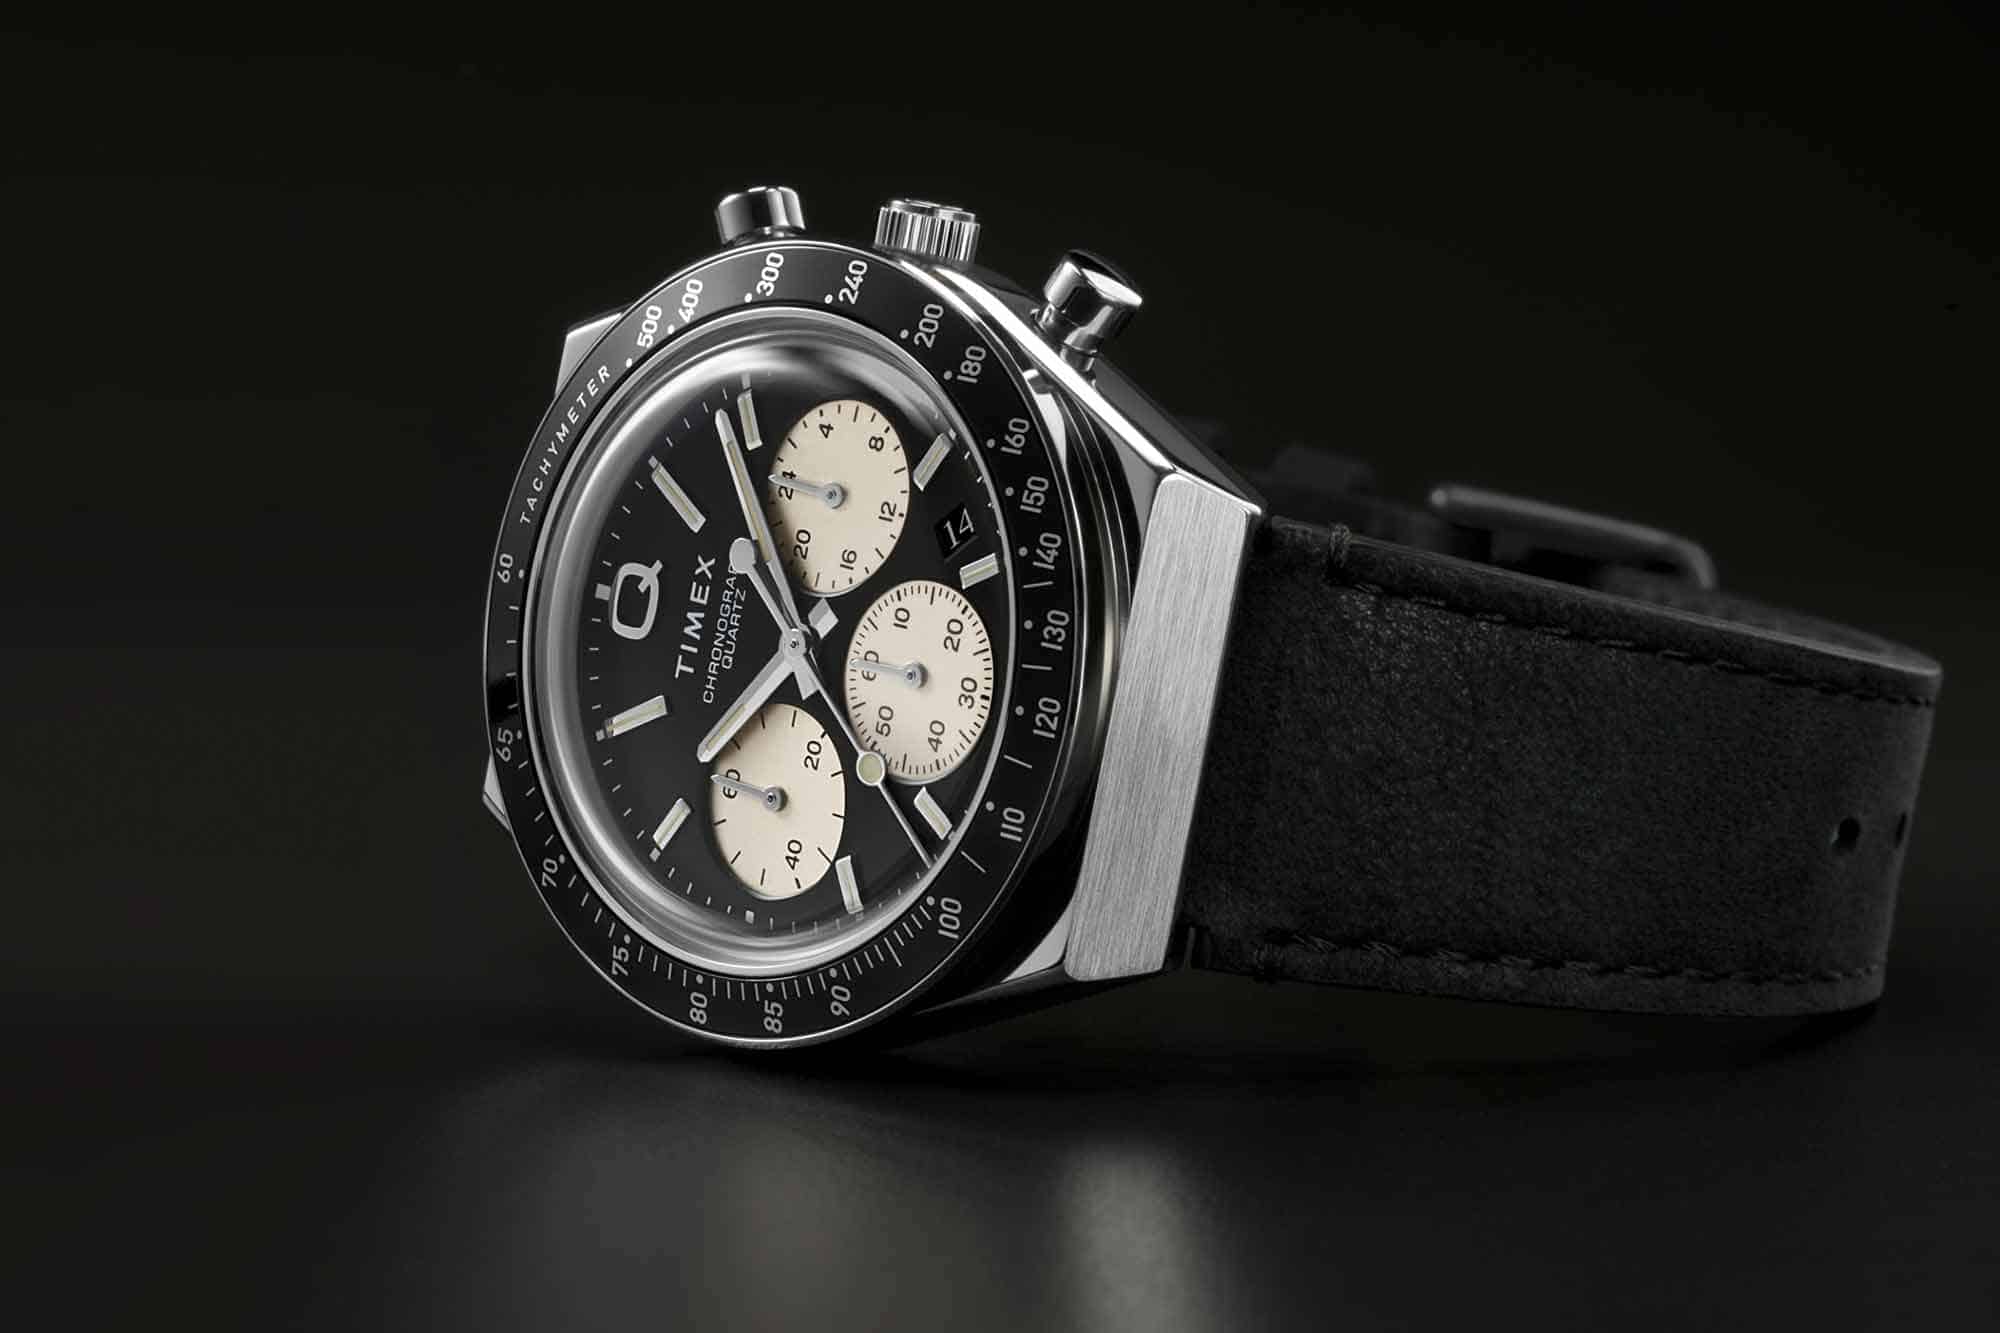 Timex Adds a Chronograph to the Q Collection - Worn & Wound